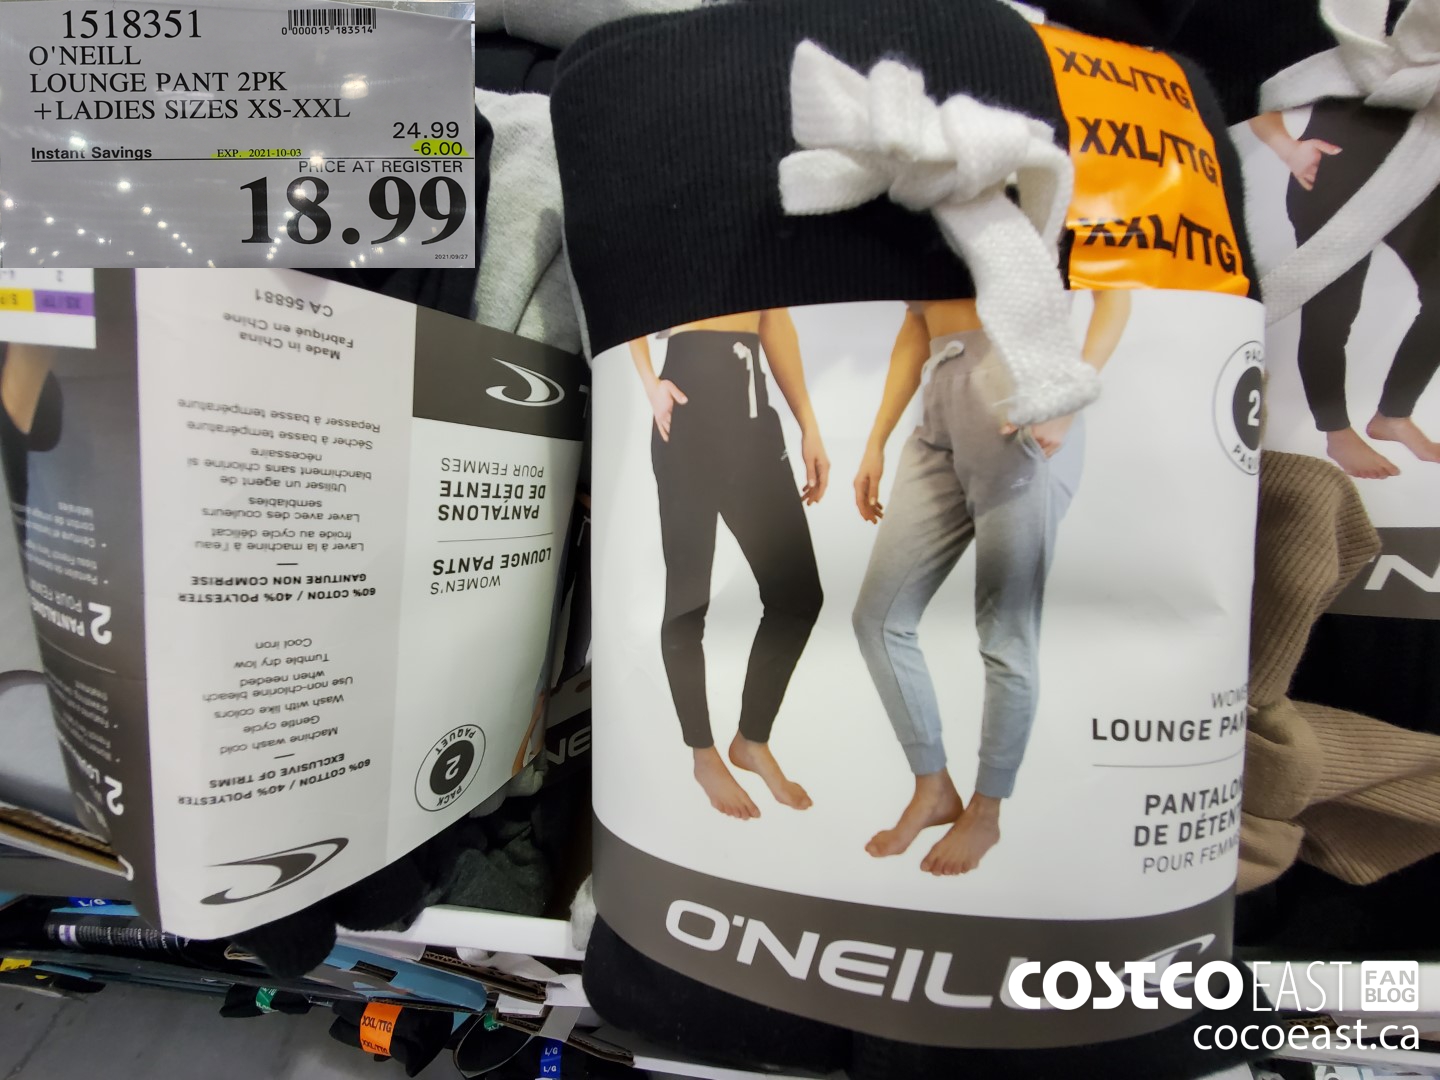 https://east.cocowest1.ca/uploads/2021/09/ONEILL_LOUNGE_PANT_2PK_LADIES_SIZES_XSXXL__20210927.jpg